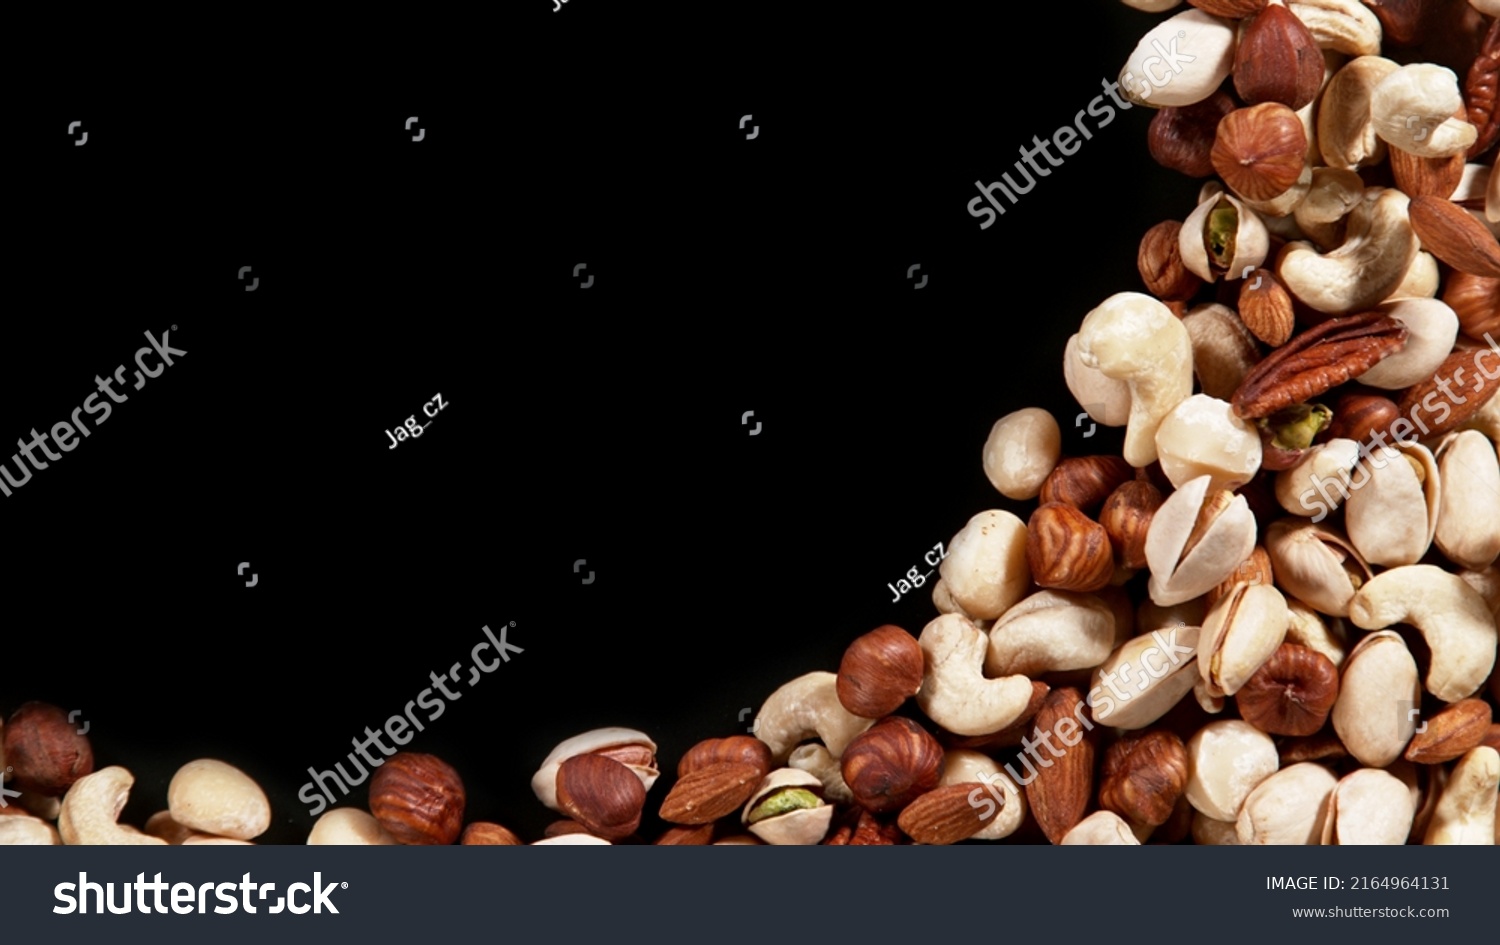 Nuts mix islated on black background, top view with copyspace. Assorted mixed nuts isolated on dark table. #2164964131